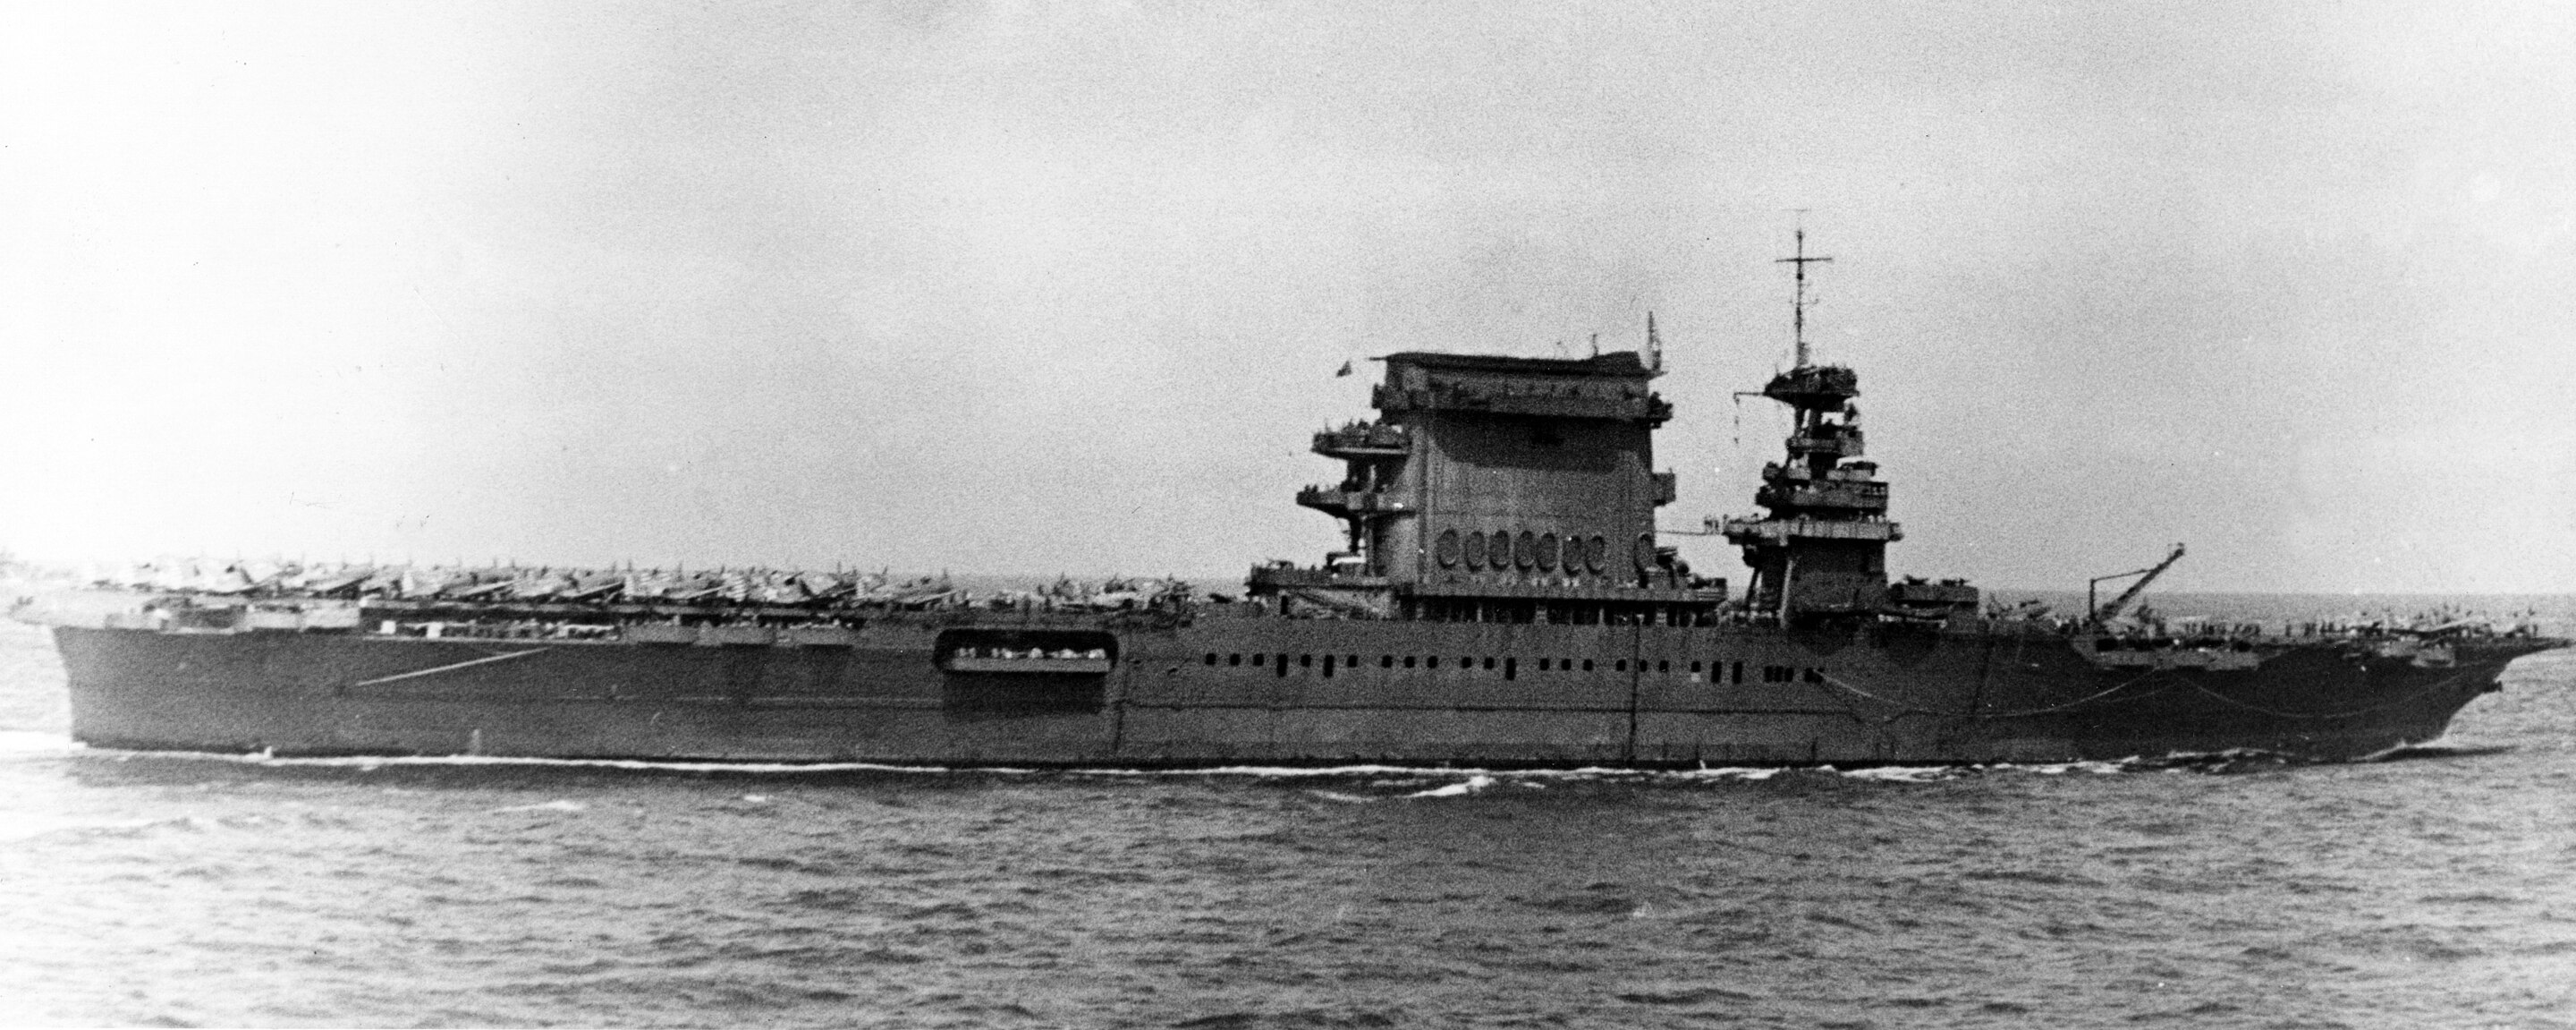 Damaged_USS_Lexington_(CV-2)_underway_on_the_early_afternoon_of_8_May_